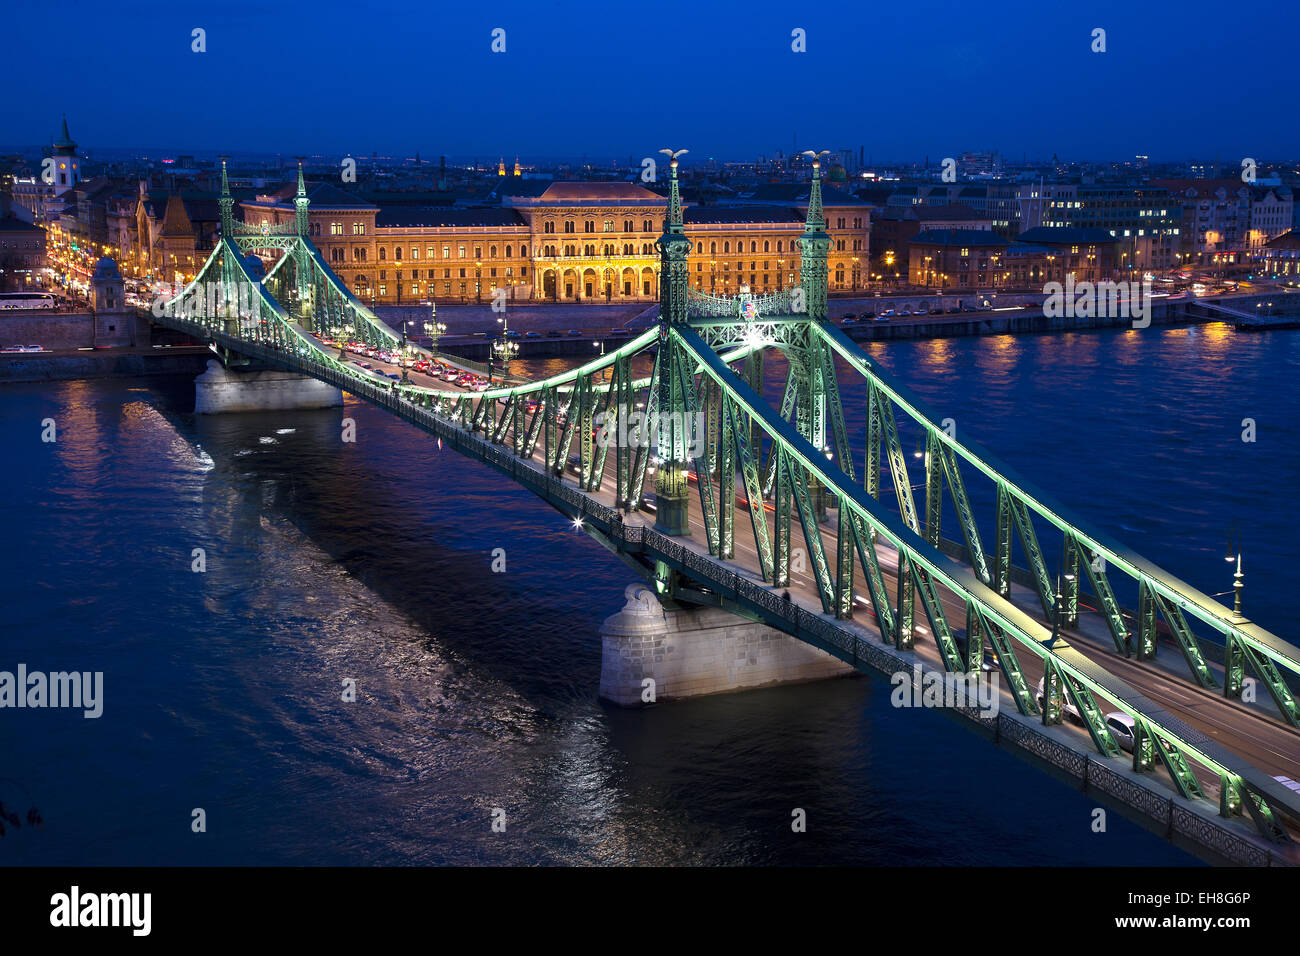 Liberty Bridge (also known as Freedom Bridge and Szabadság hid) spanning the river Danube, Budapest, Hungary.  Taken at dusk. Stock Photo